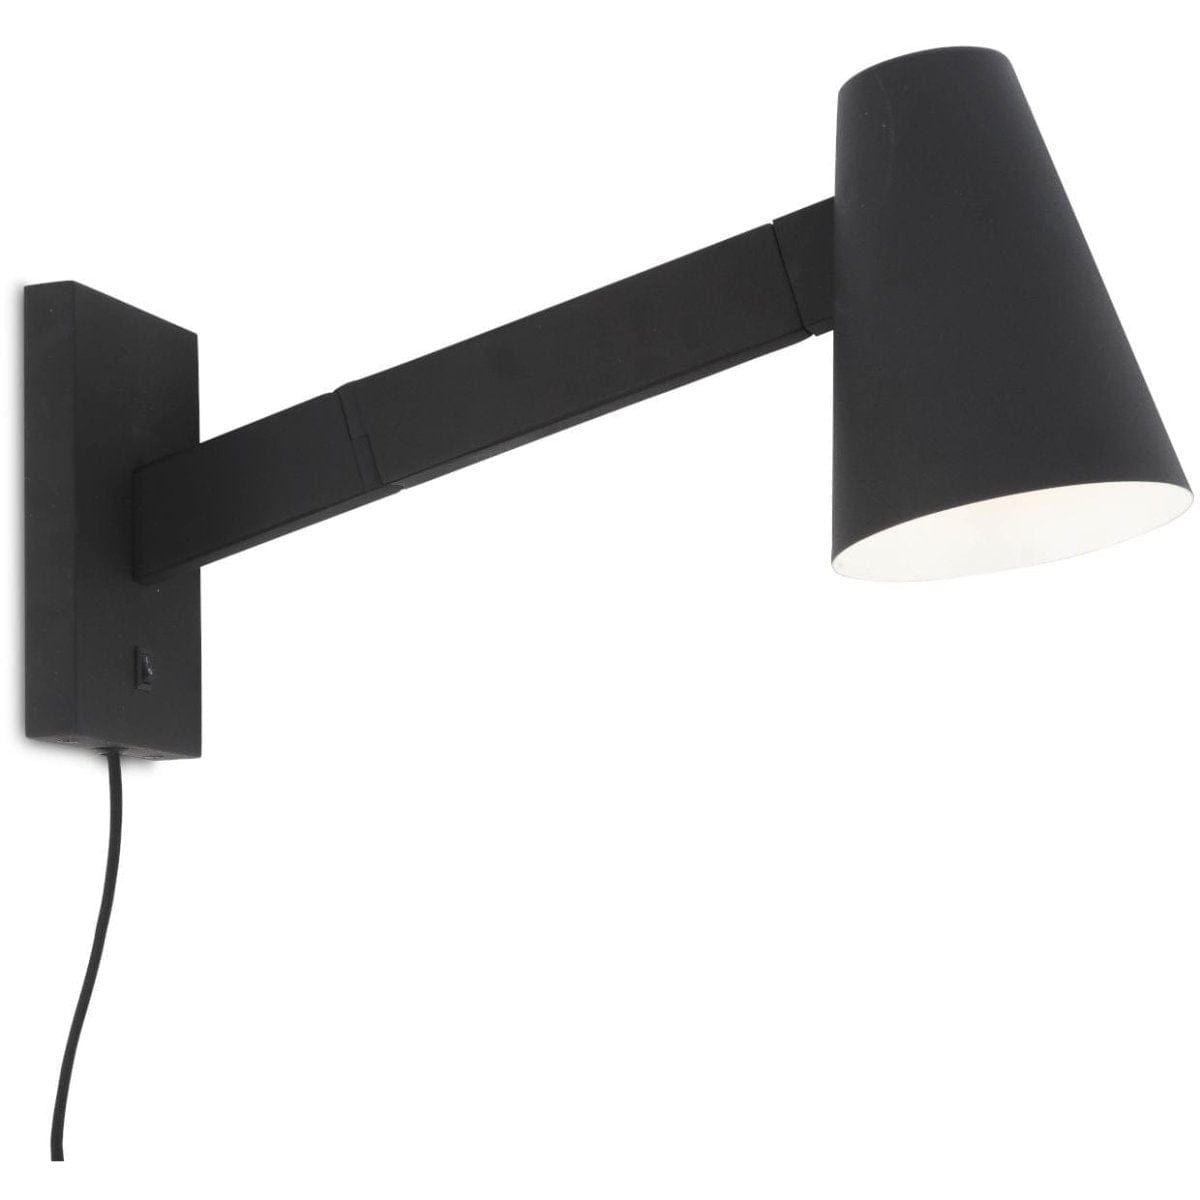 It's About RoMi Wall Lights Biarritz Wall Lamp, black or white